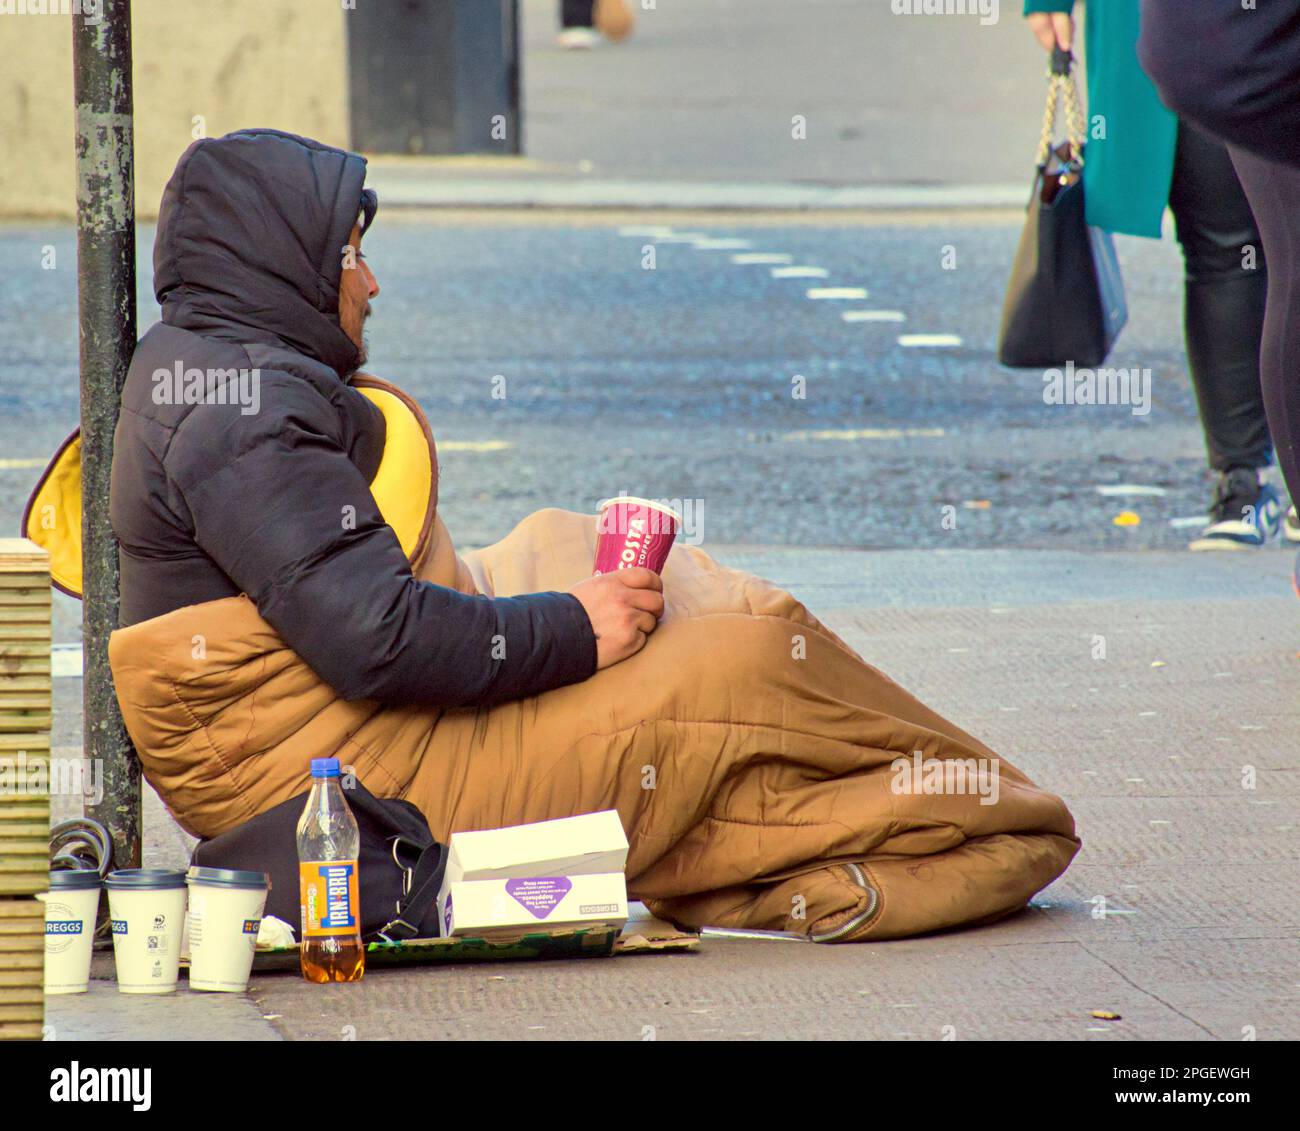 homeless person begging Stock Photo